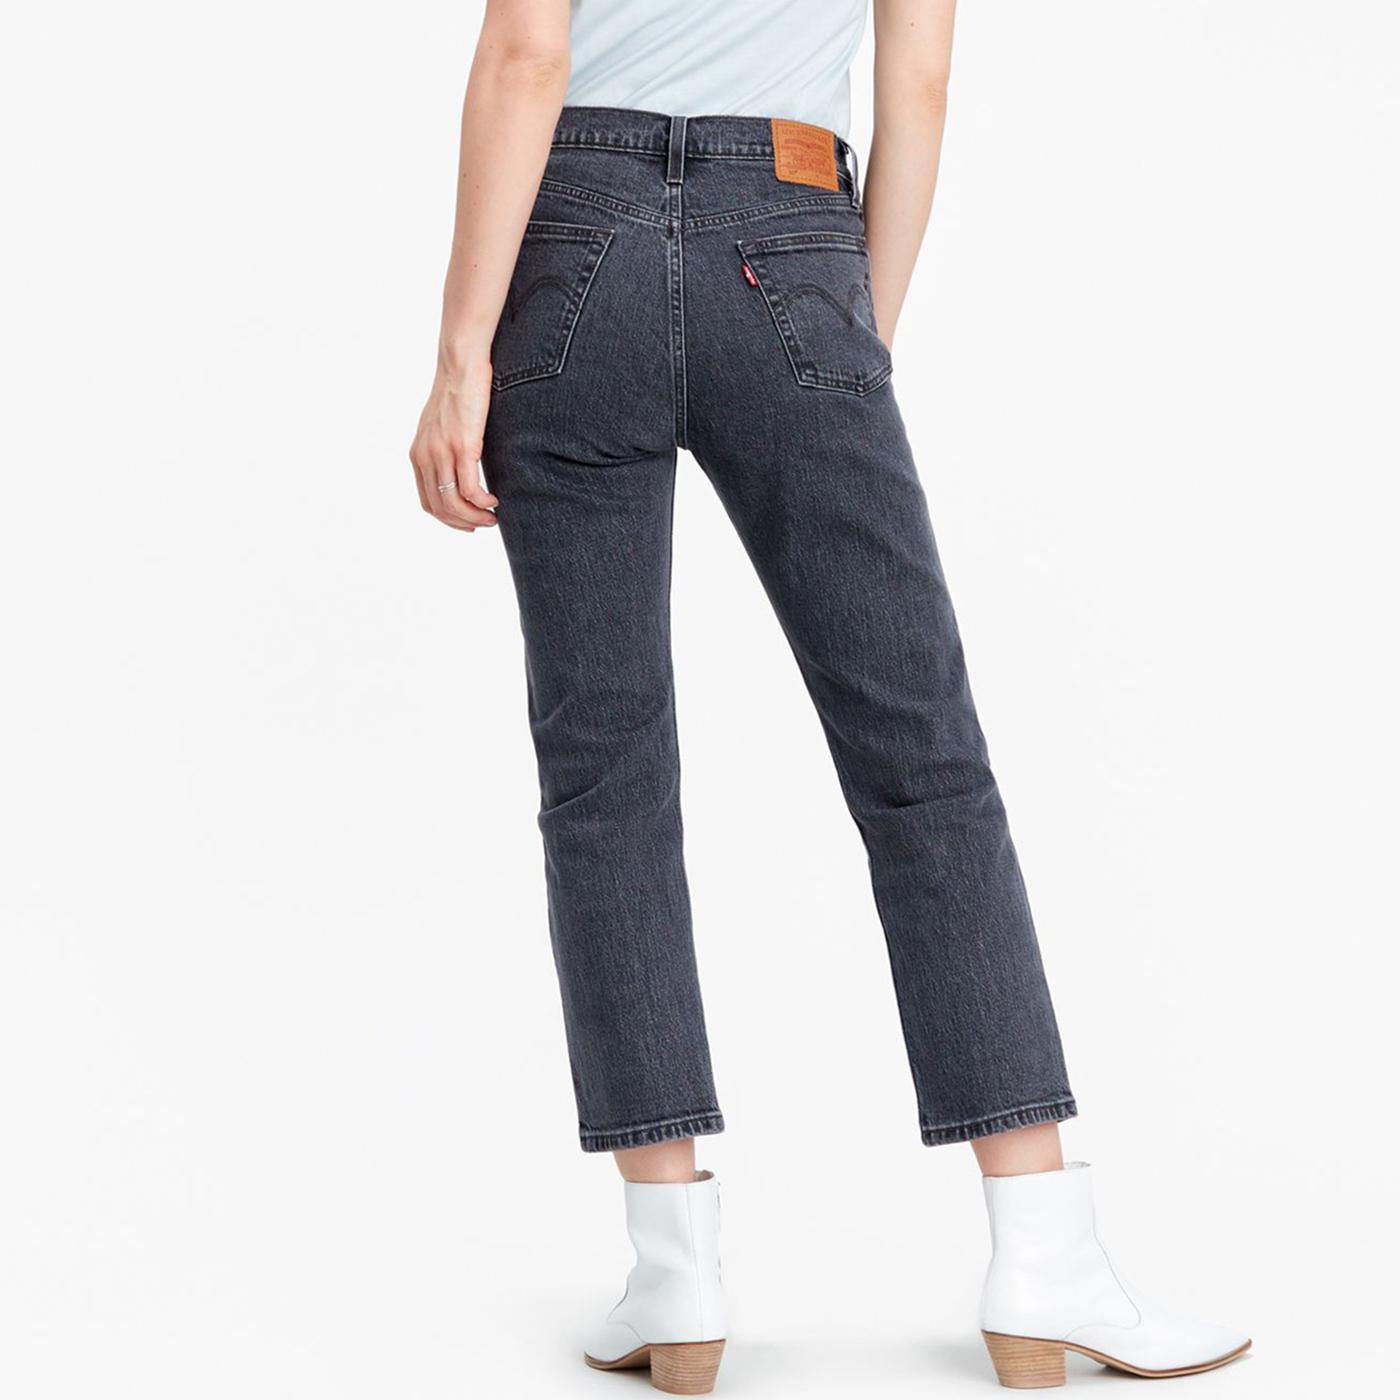 LEVI'S® Women's 501® Original Cropped Jeans in Cabo Fade